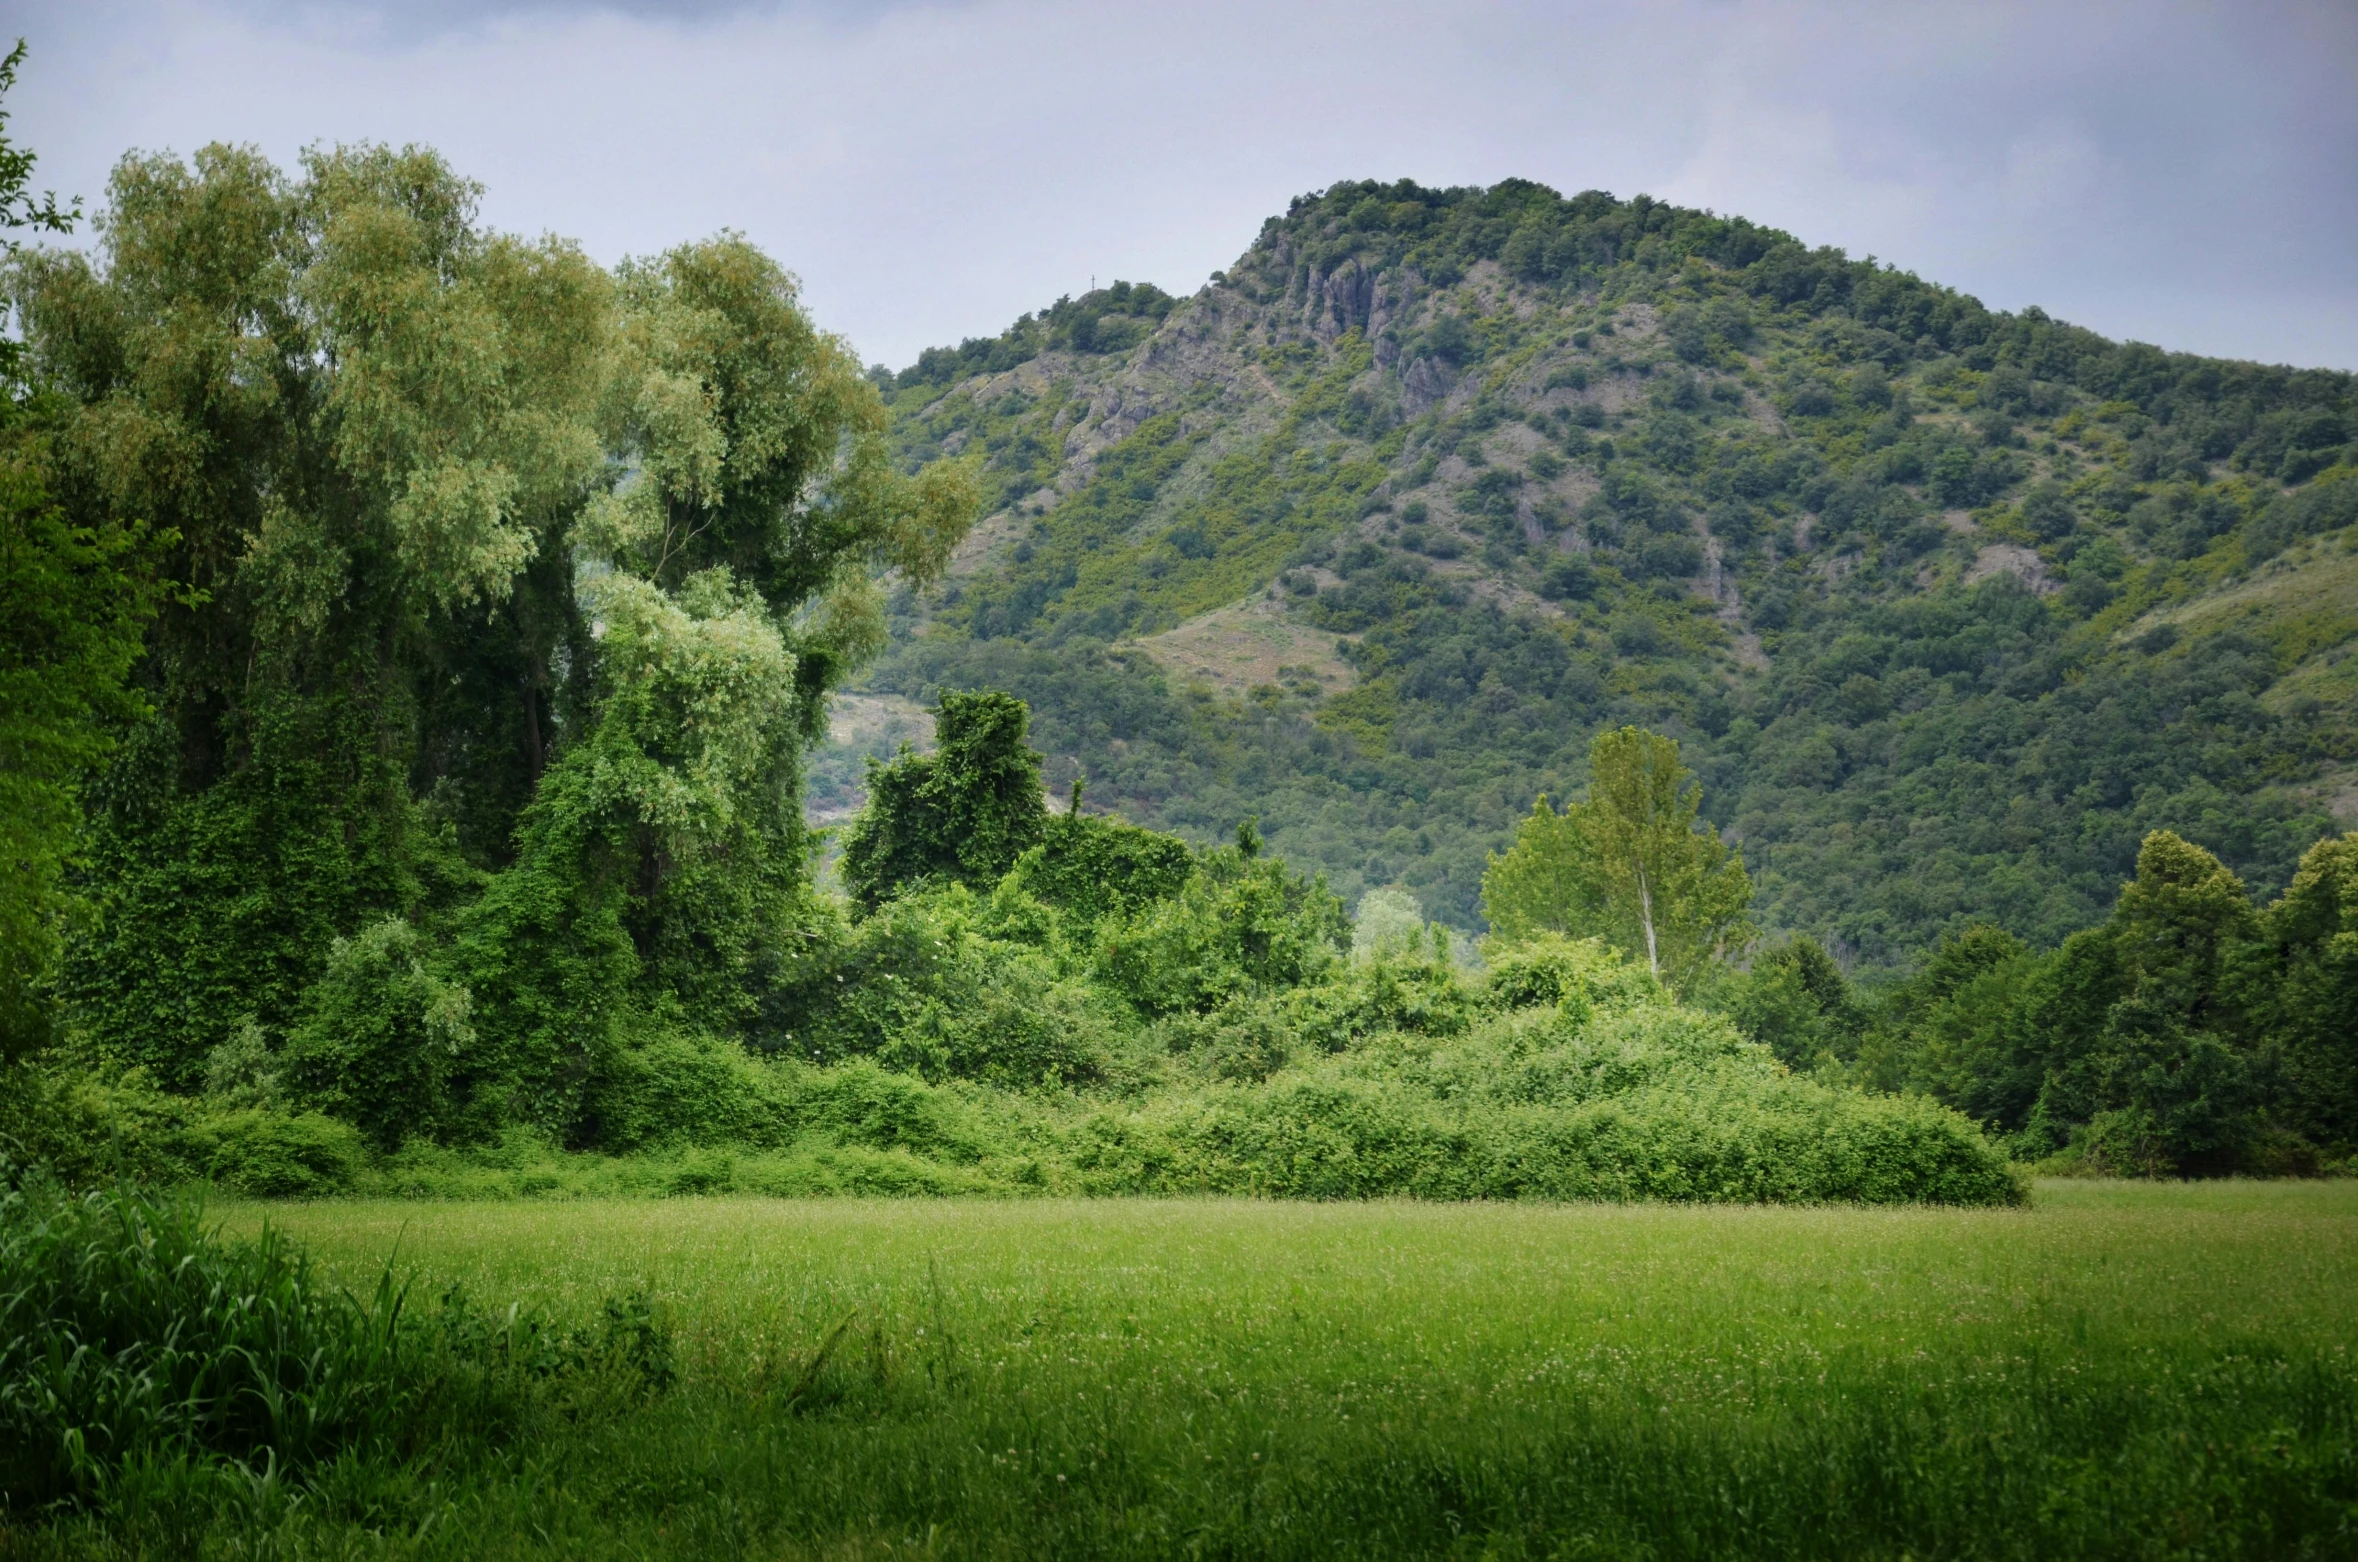 the land is surrounded by mountains and green vegetation